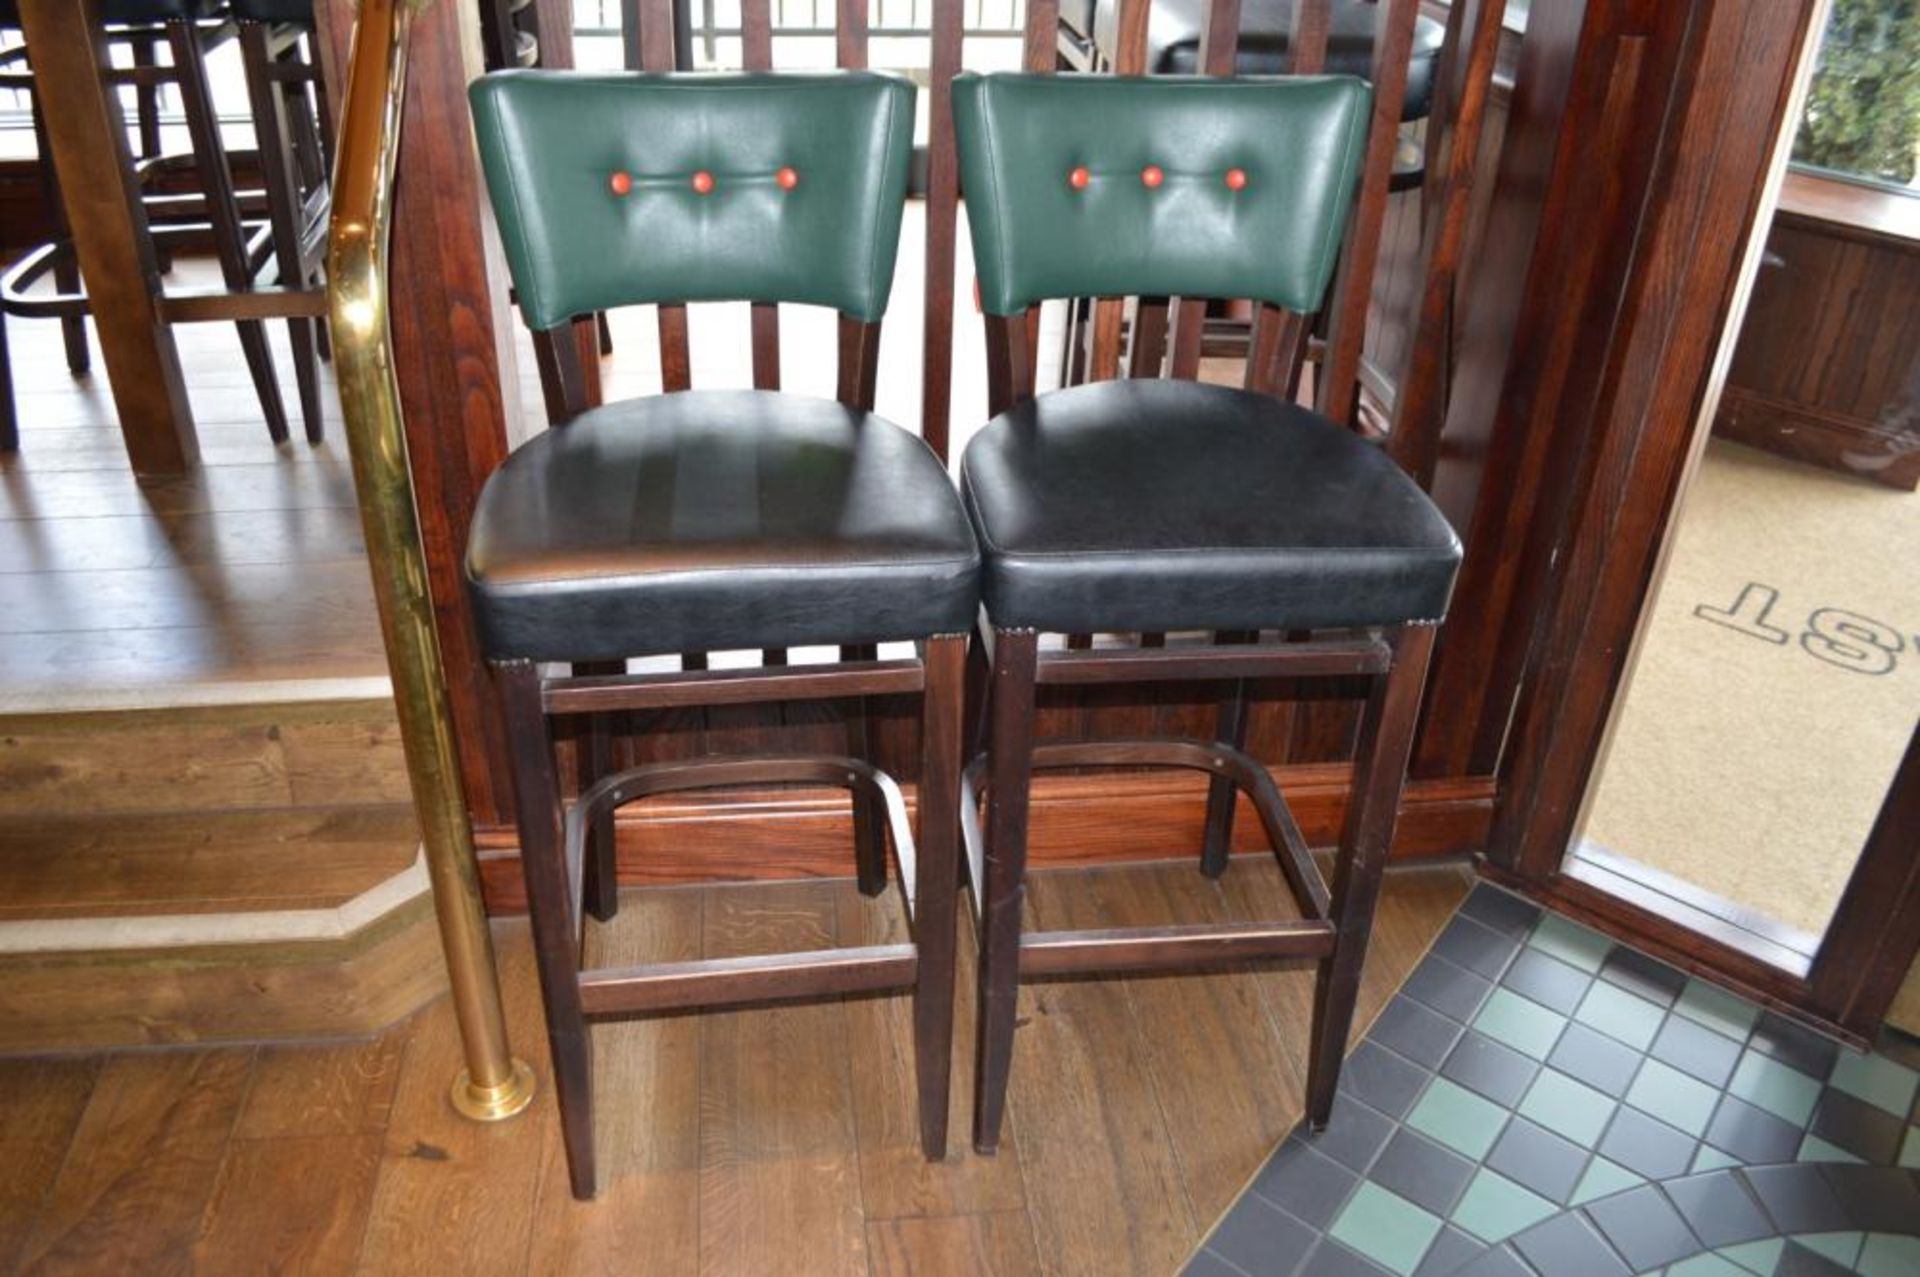 4 x Contemporary Button Back Restaurant Bar Stools - Upholstered in a Quality Green and Black Faux - Image 4 of 7